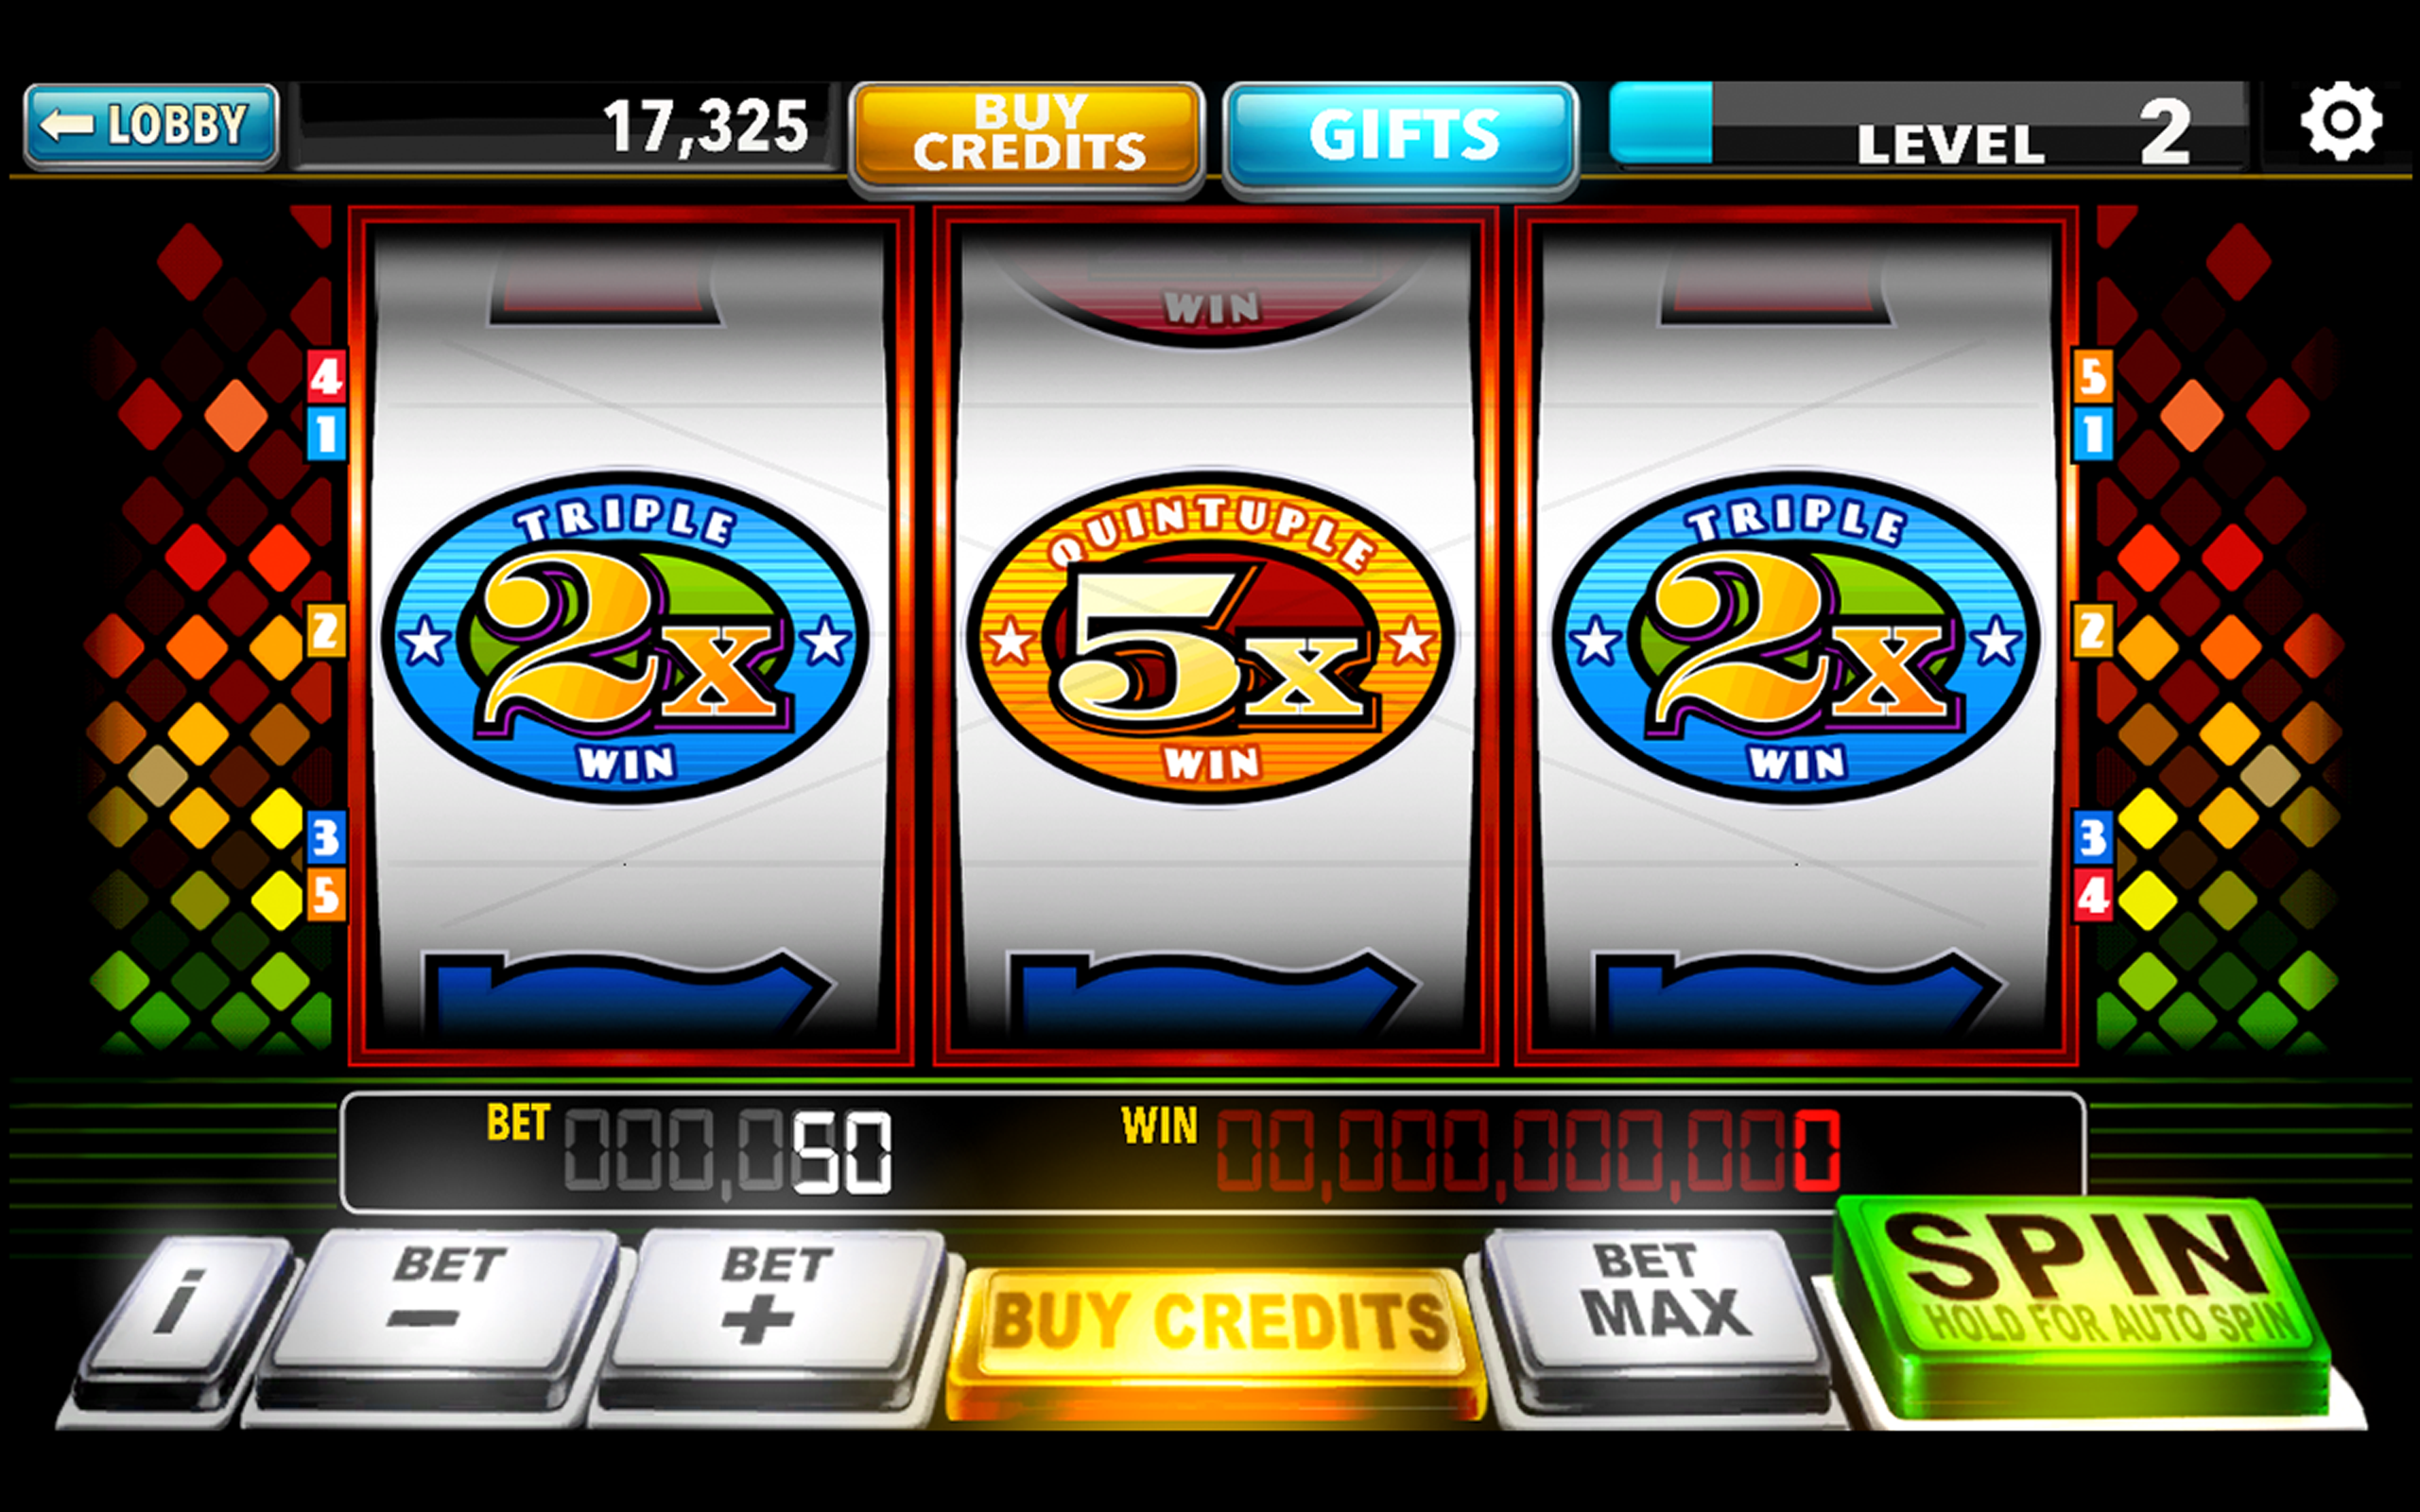 Discover The Latest Slots And Games Bonuses